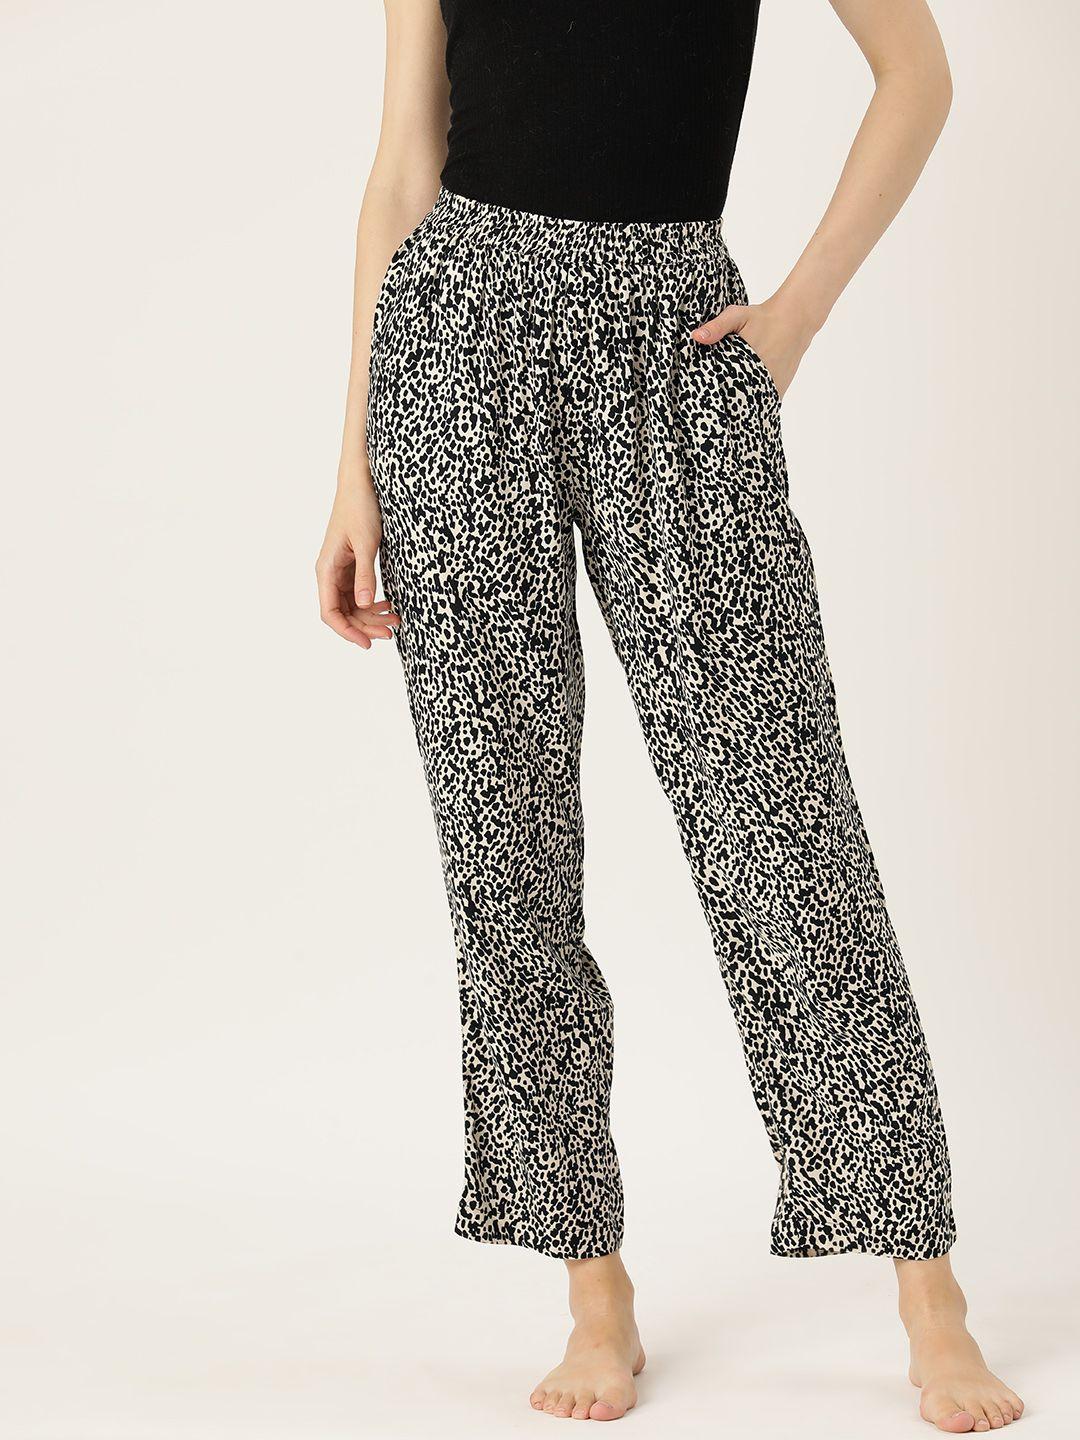 rue collection printed pure cotton lounge pants